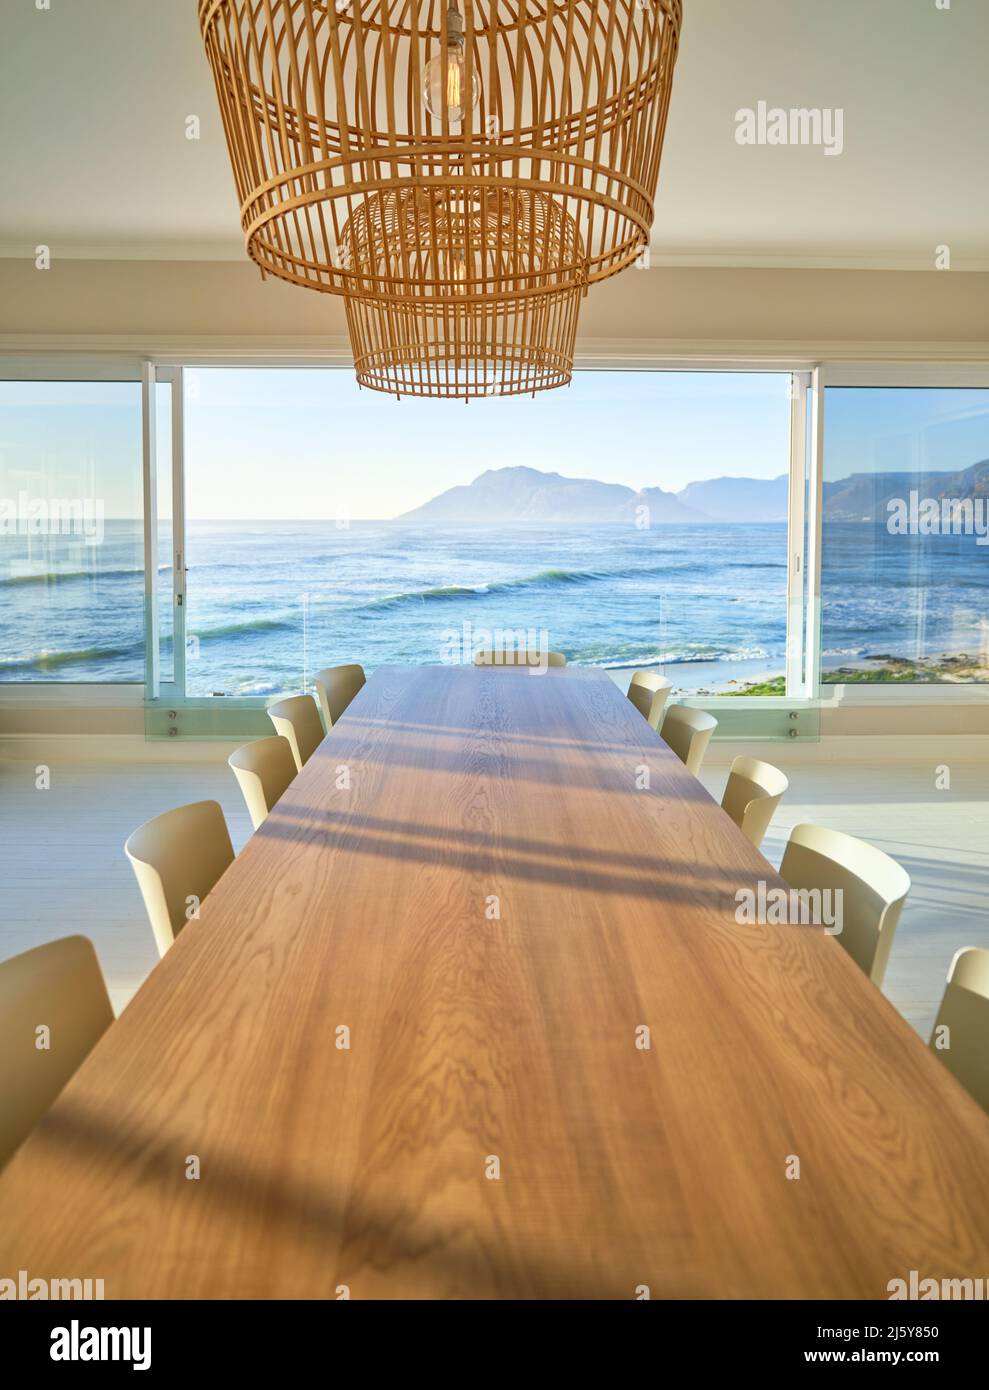 Rattan pendant lights over wooden dining table with sunny ocean view Stock Photo